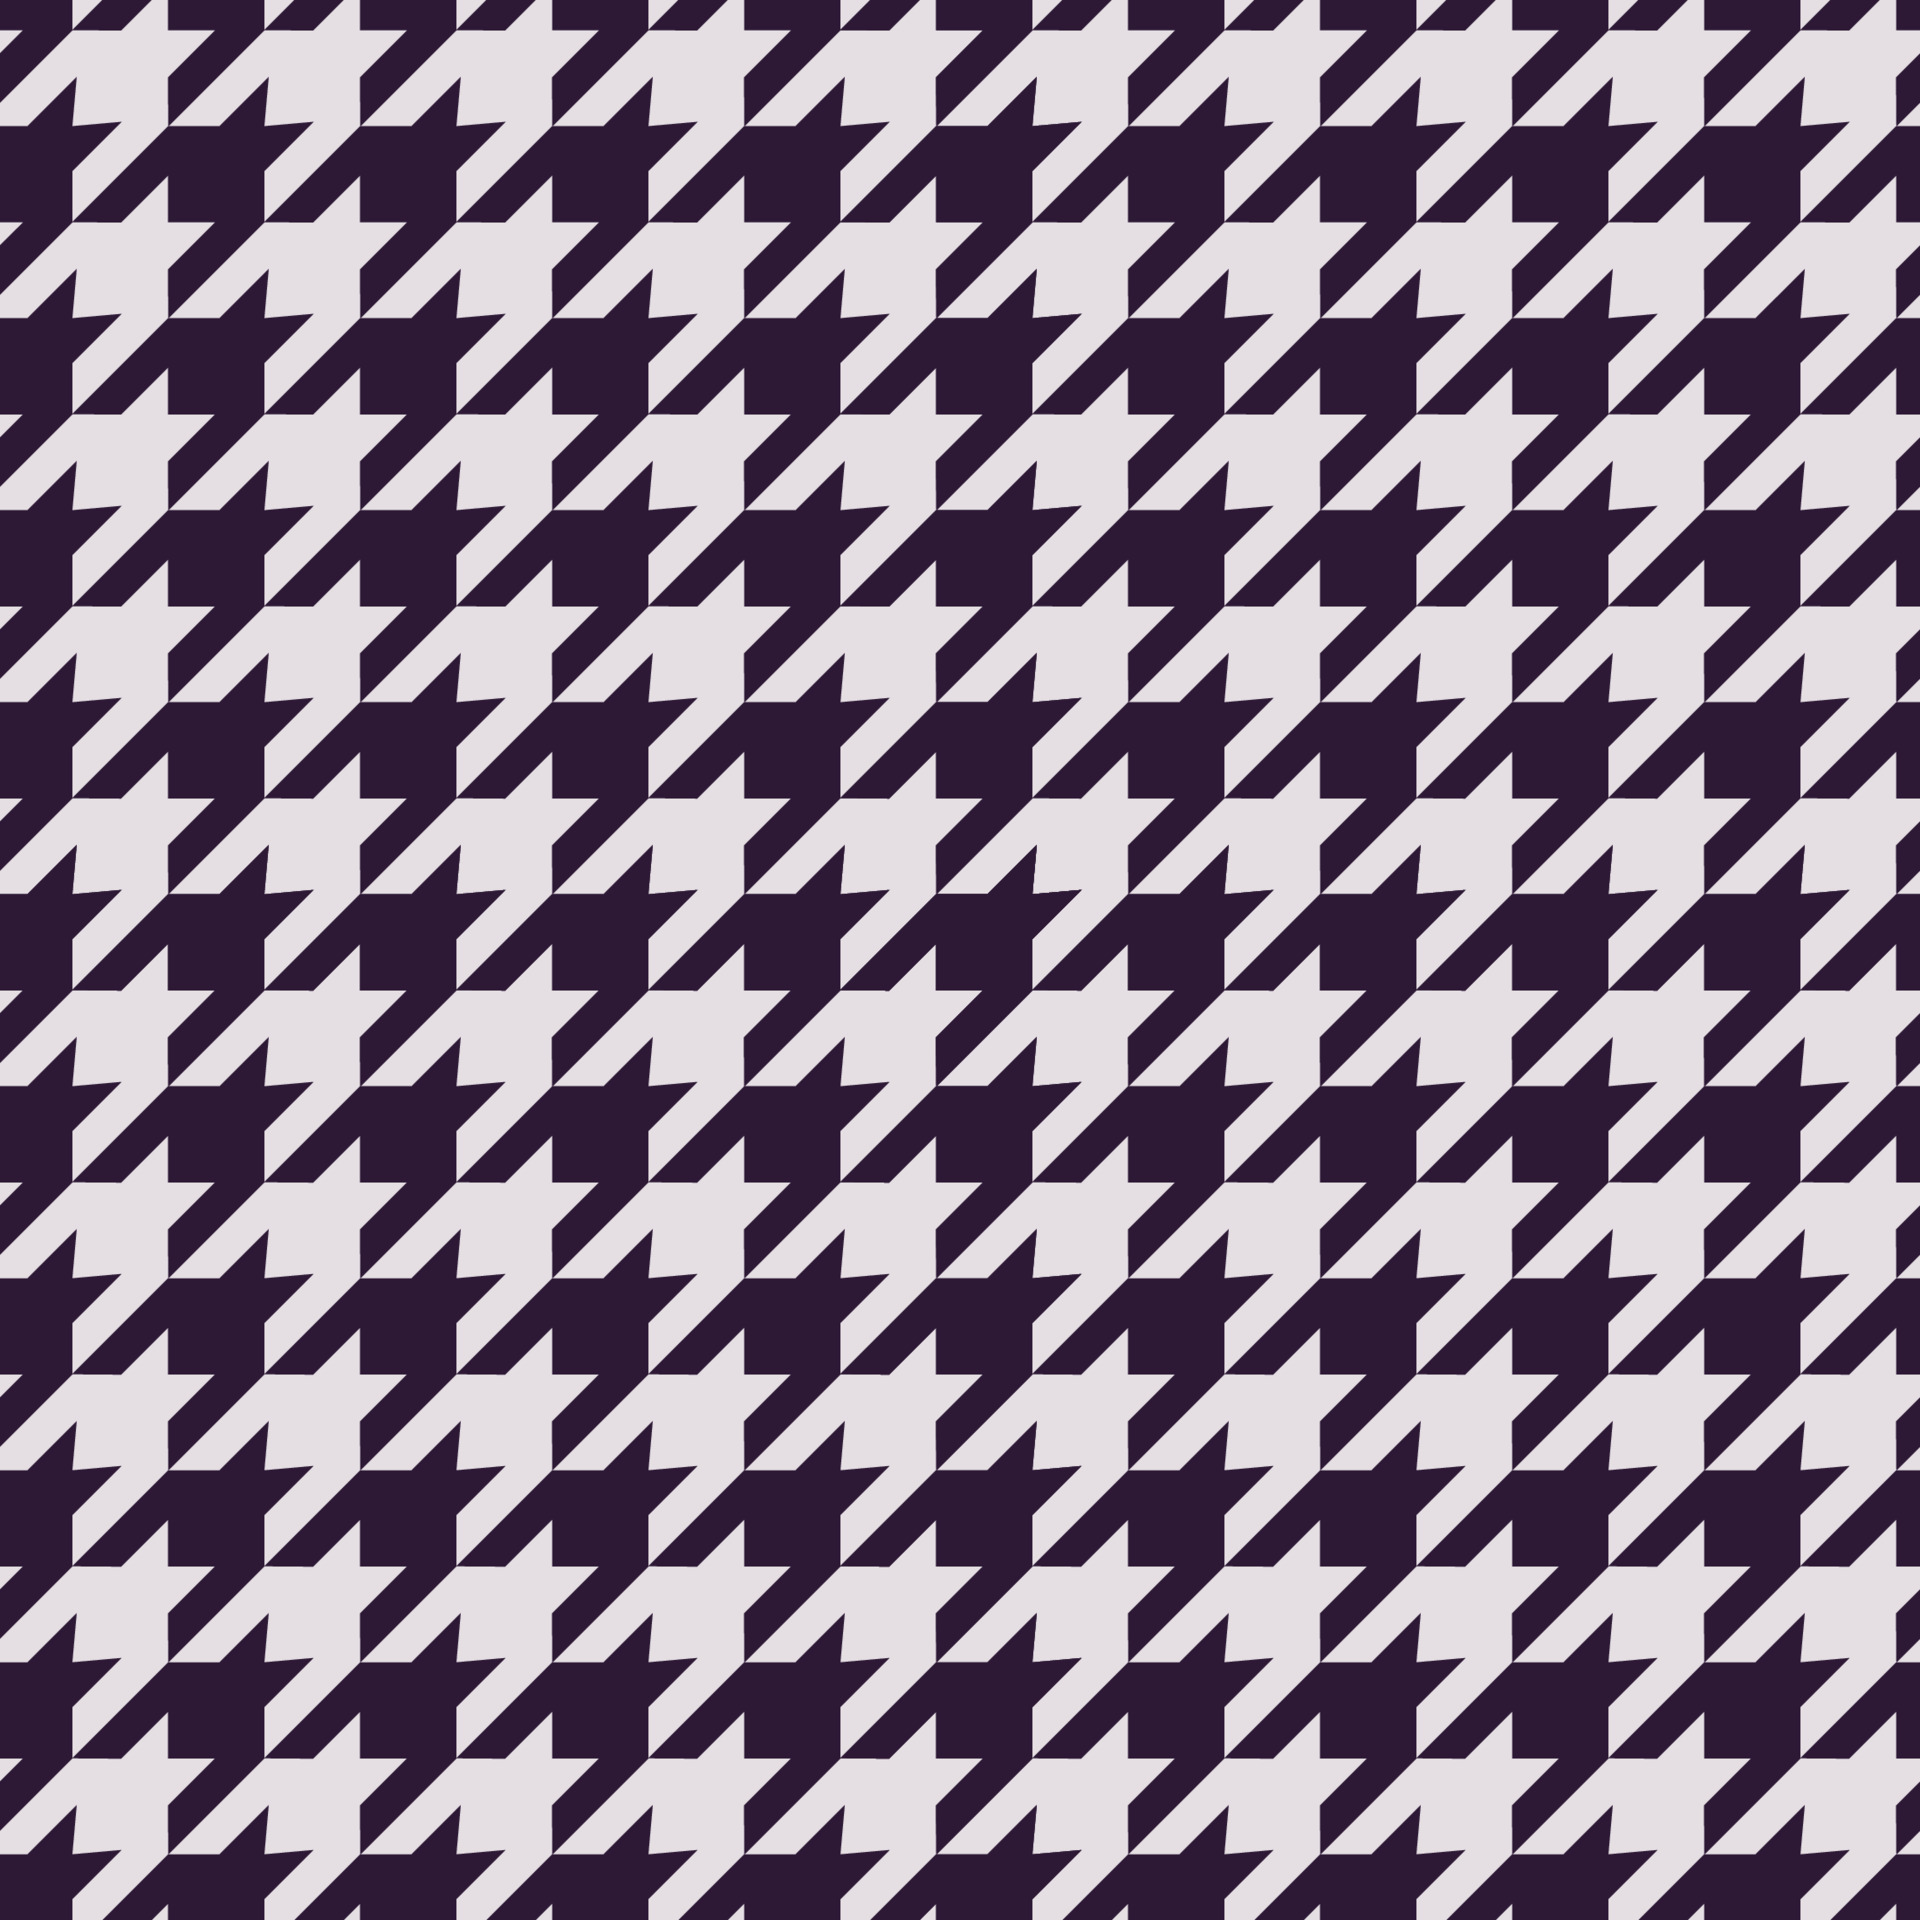 Packs  HOUNDSTOOTH COLLECTION  Houndstooth pack wallpapers seamless  textures 00032